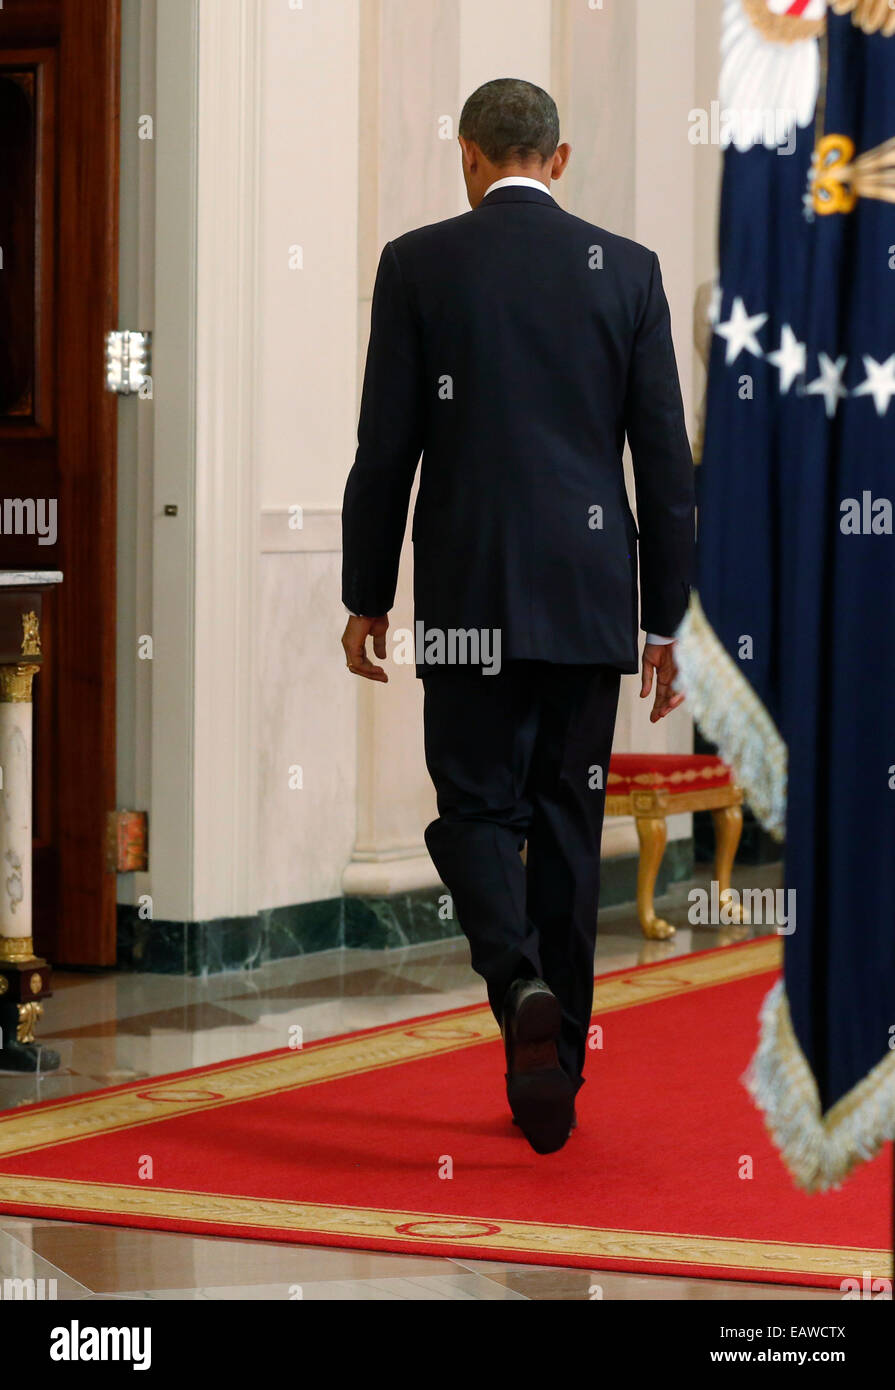 Washington DC, USA. 20th November, 2014. United States President Barack Obama departs after announcing executive actions on U.S. immigration policy during an address from the White House in Washington, November 20, 2014. Obama outlined a plan on Thursday to ease the threat of deportation for about 4.7 million undocumented immigrants. Credit: Jim Bourg/Pool via CNP - NO WIRE SERVICE - Credit:  dpa picture alliance/Alamy Live News Stock Photo